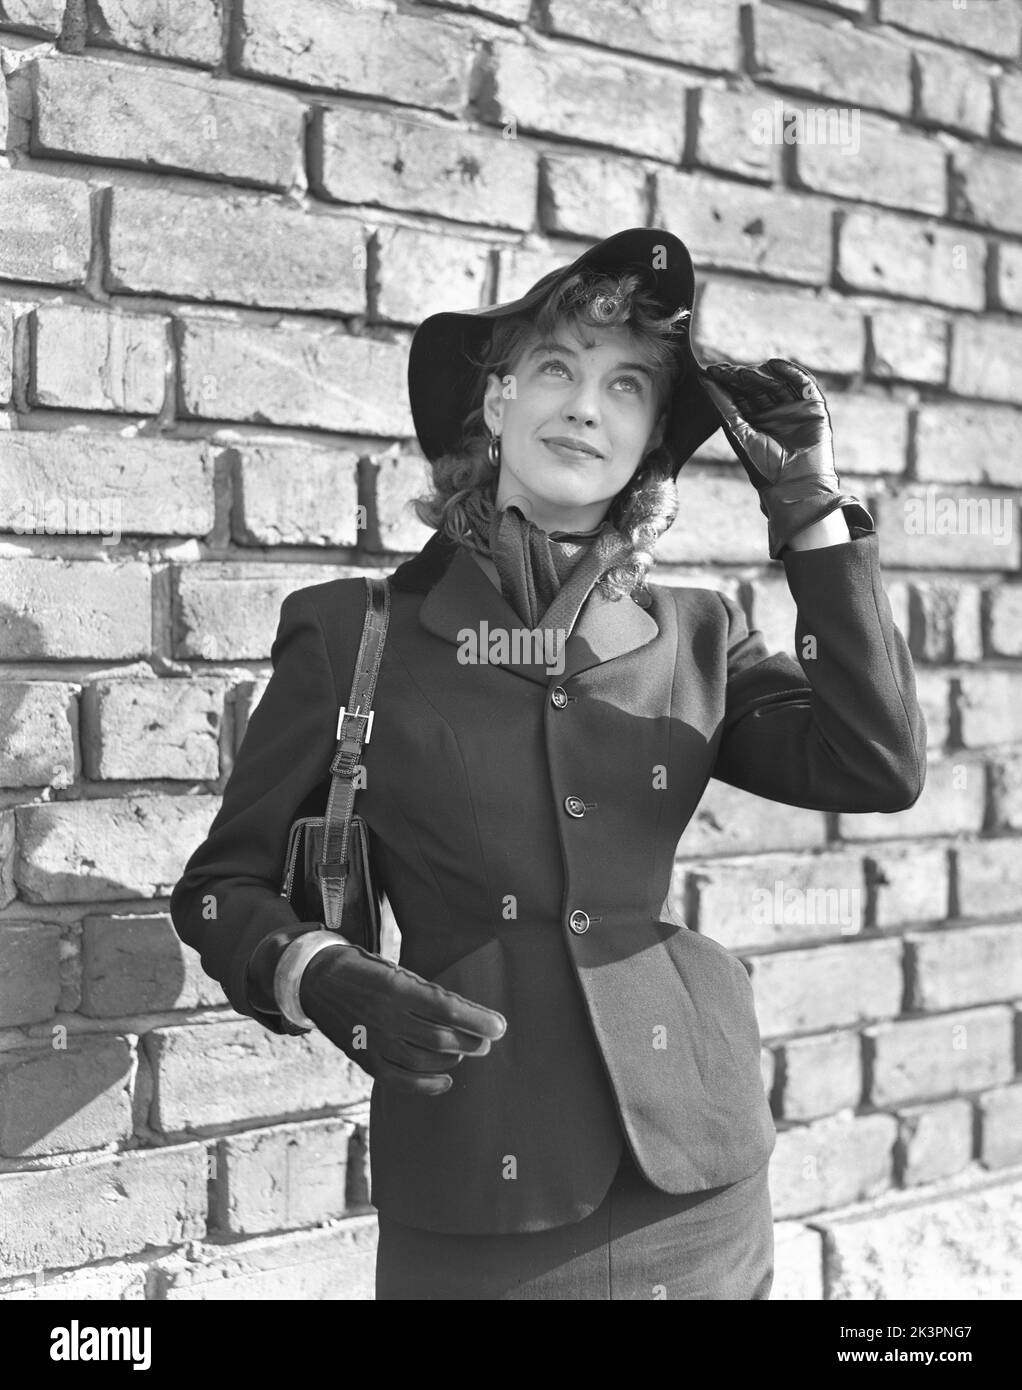 Fashionable in the 1950s. A young woman dressed in a jacket with a visible thin waistline, buttoned with three butoons. She wears a matching hat and and a scarf around her neck, black leather gloves and a handbag. Sweden 1952 Kristoffersson Ref 38K-20 Stock Photo